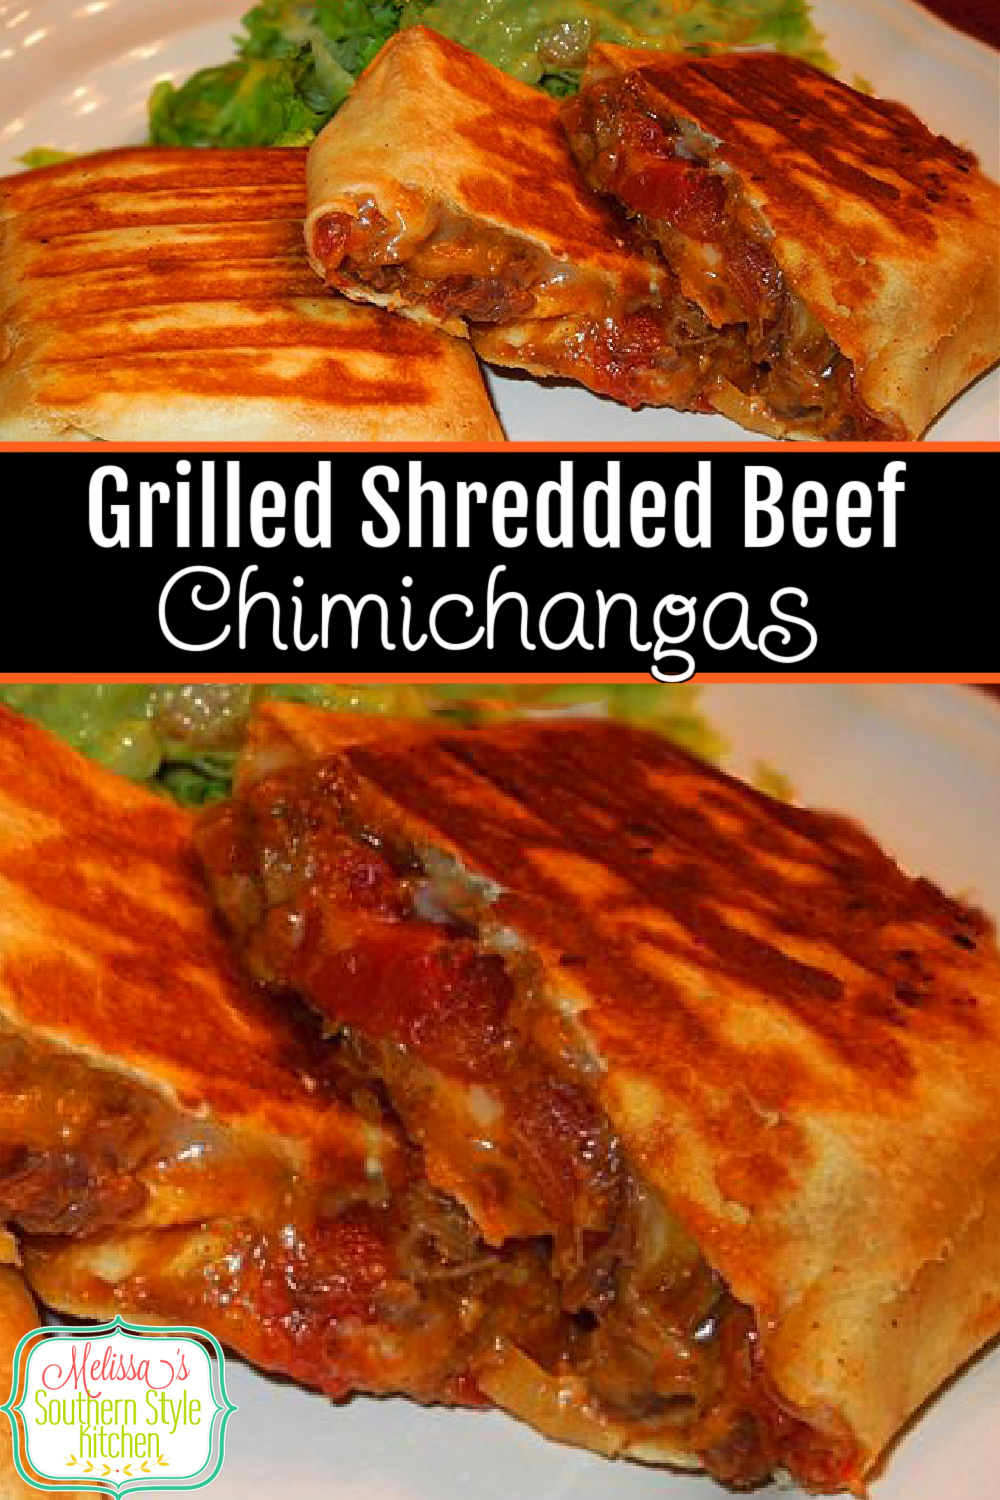 Turn leftover pot roast into these incredibly delicious Grilled Shredded Beef Chimichangas #chimichangas #beef #potroast #beefchimichanges #shreddedbeef #mexicanfood #dinnerideas #southernrecipes